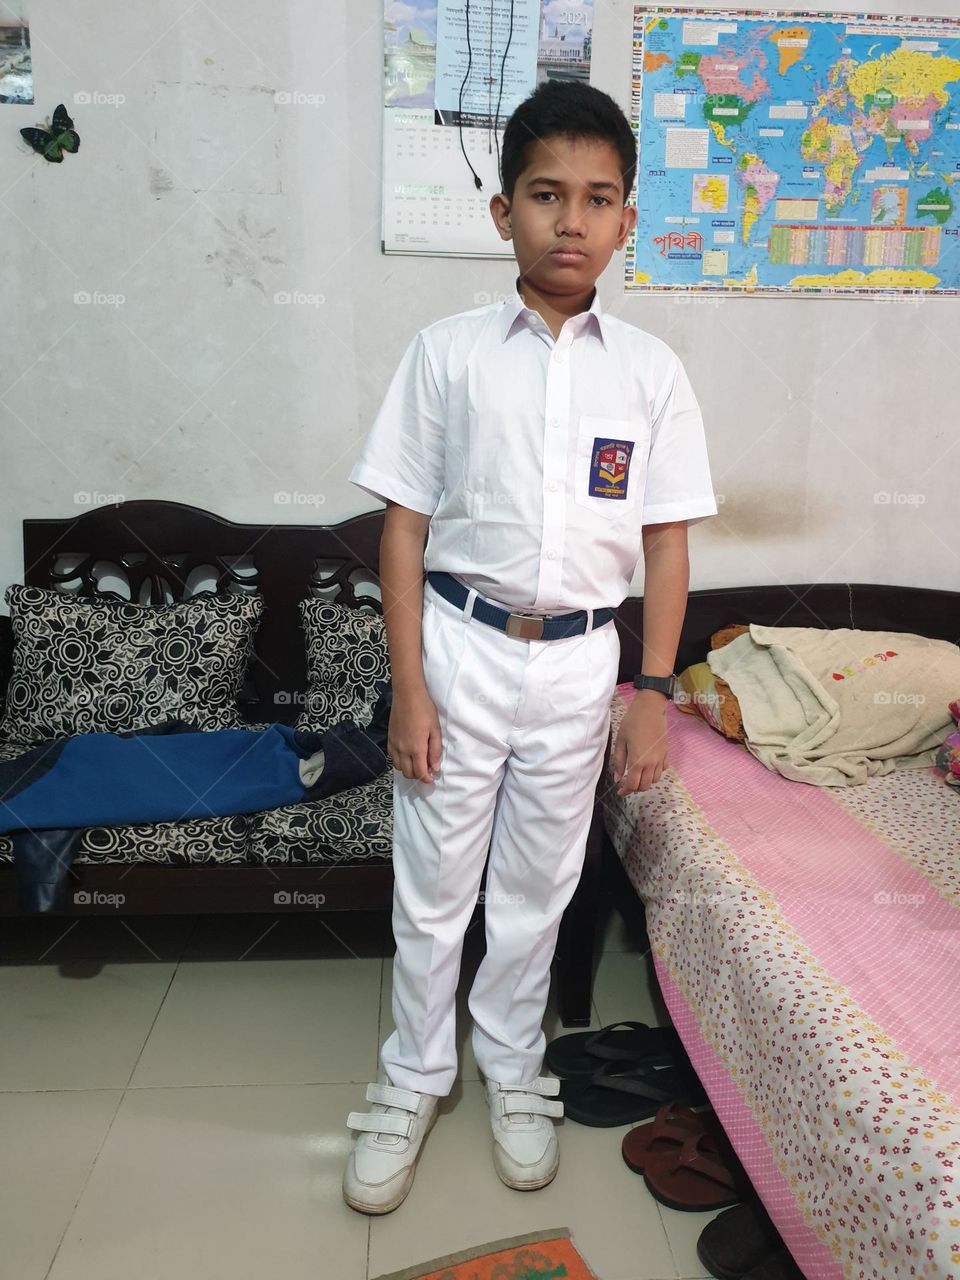 My Boy 👦 Going to School 🏫. 1st day after Covid-19.